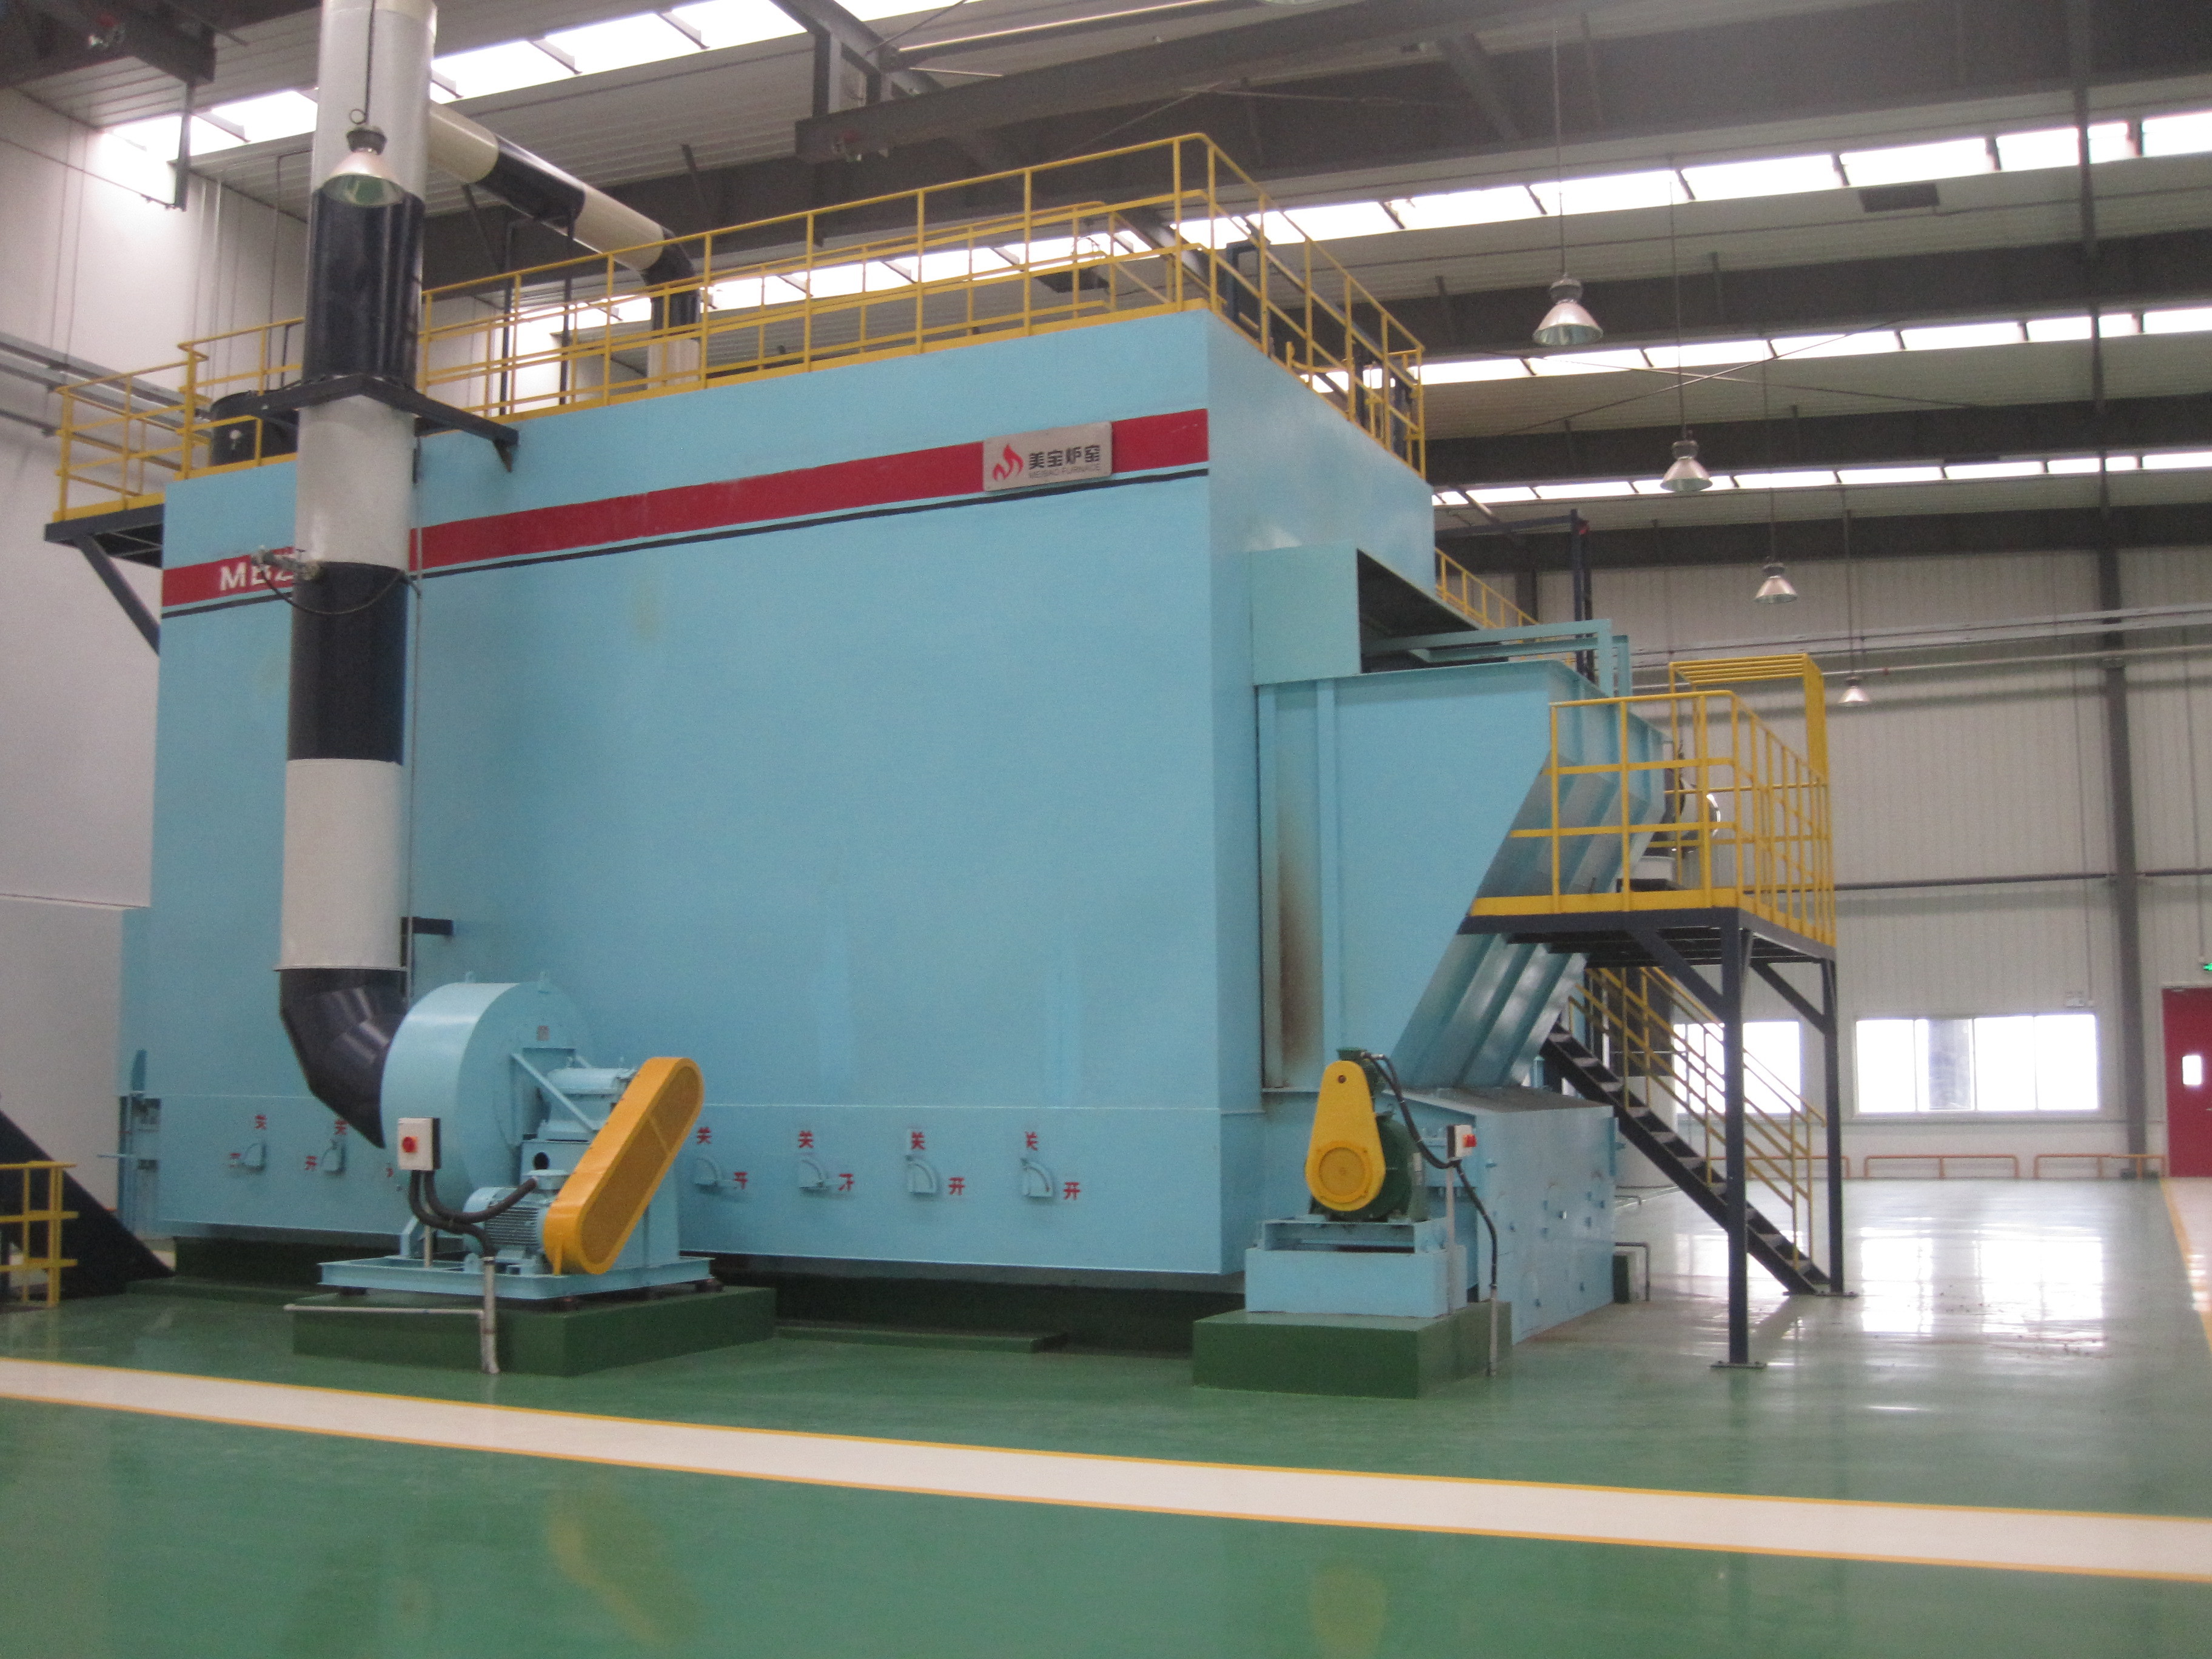 Quality Automatic Hot Air Generator / Chemical Industry Hot Air Drying Furnace for sale